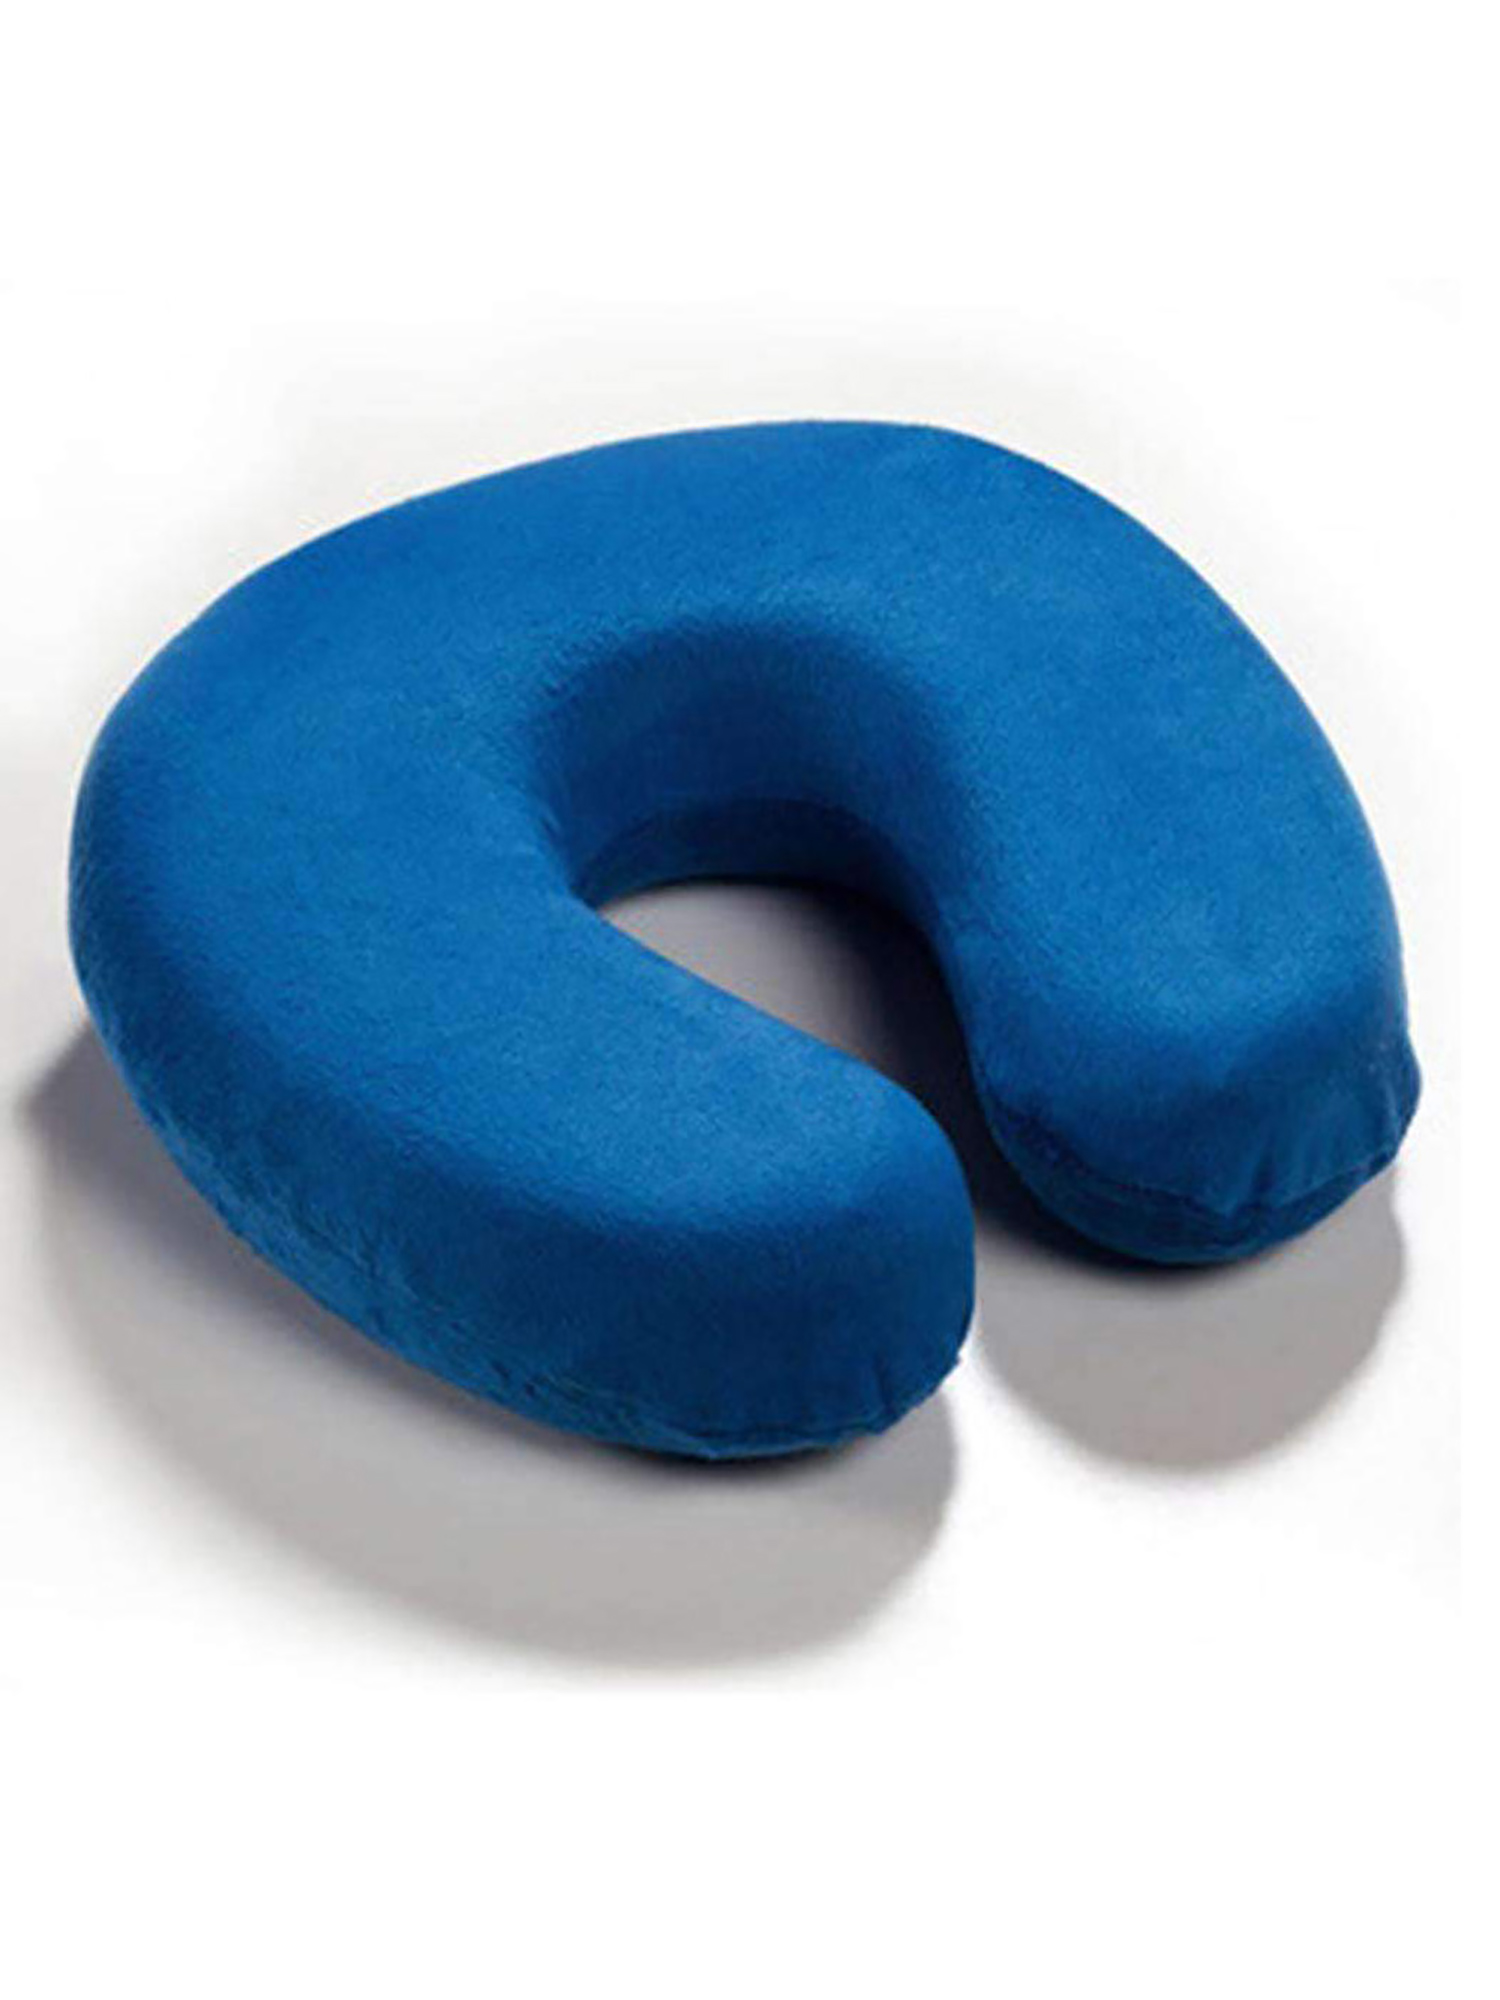 GEARONIC TM Travel Pillow Memory Foam Neck Cushion Support Rest Outdoors Car Flight - image 3 of 3